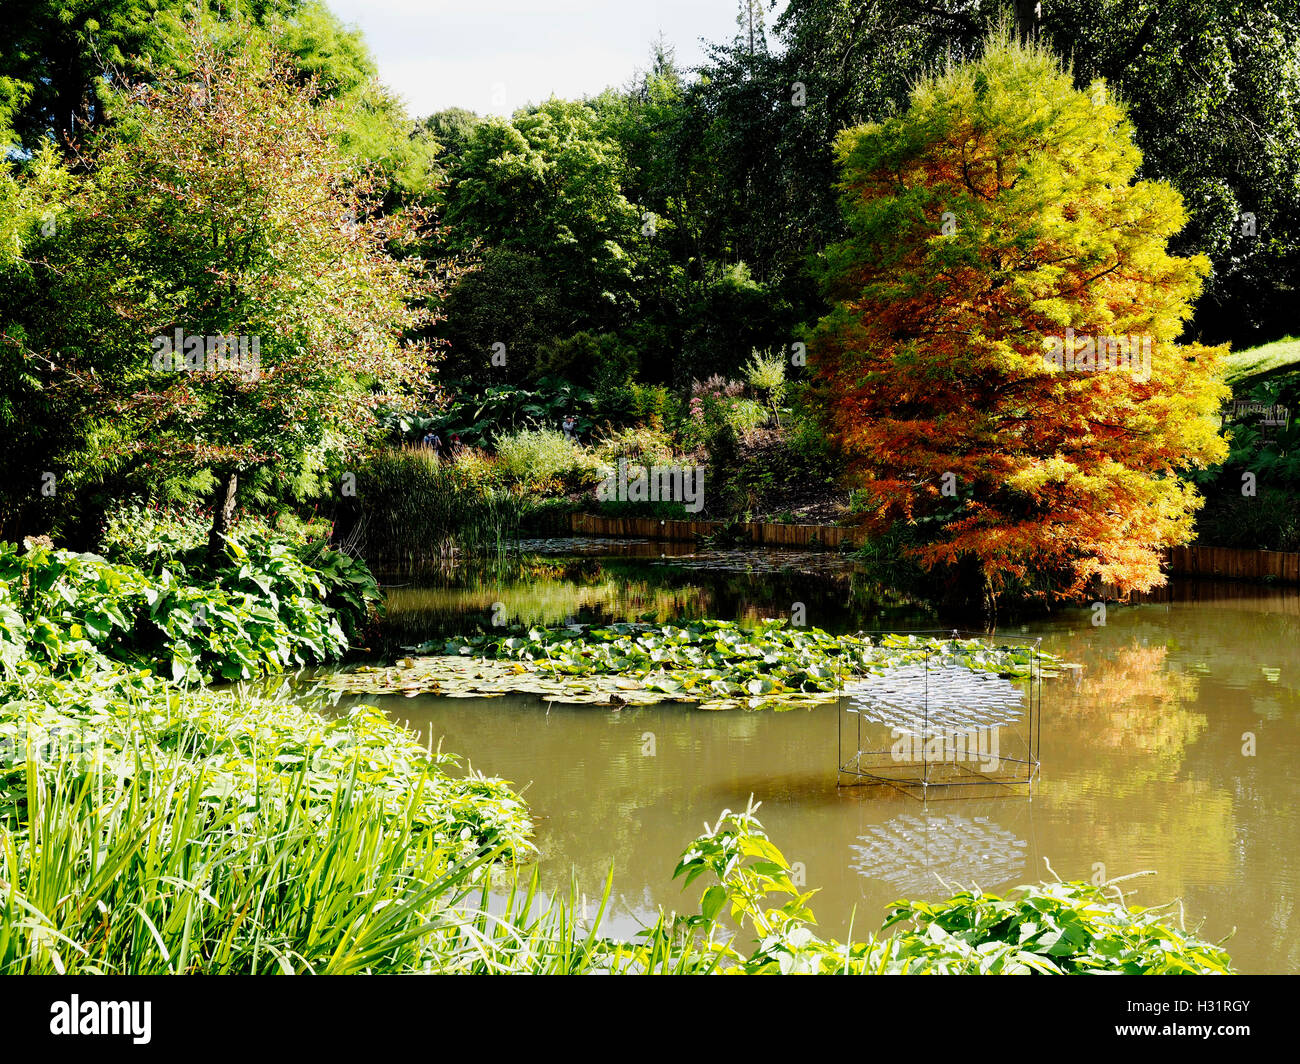 The pond at Sir Harold Hilllier Gardens with a swamp cypress (Taxodium distichum) developing autumn colour. Stock Photo